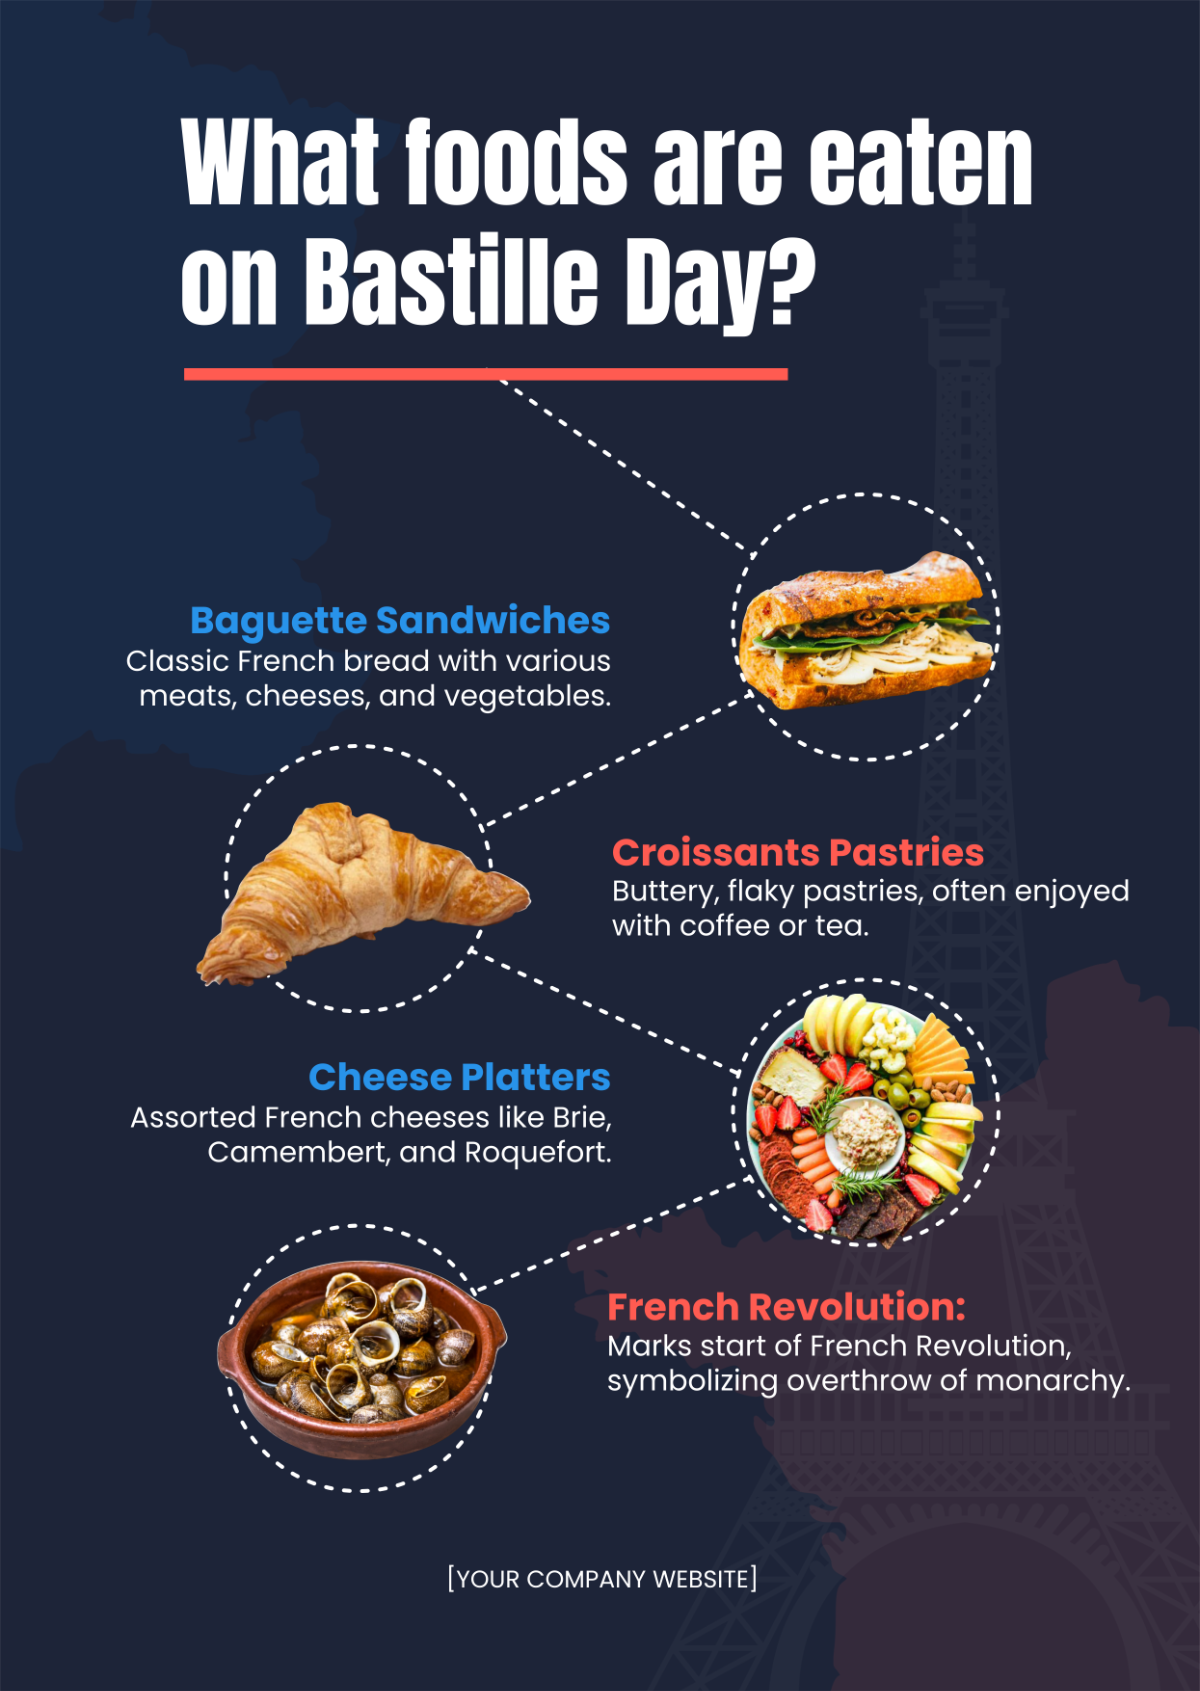 What Foods are Eaten on Bastille Day?